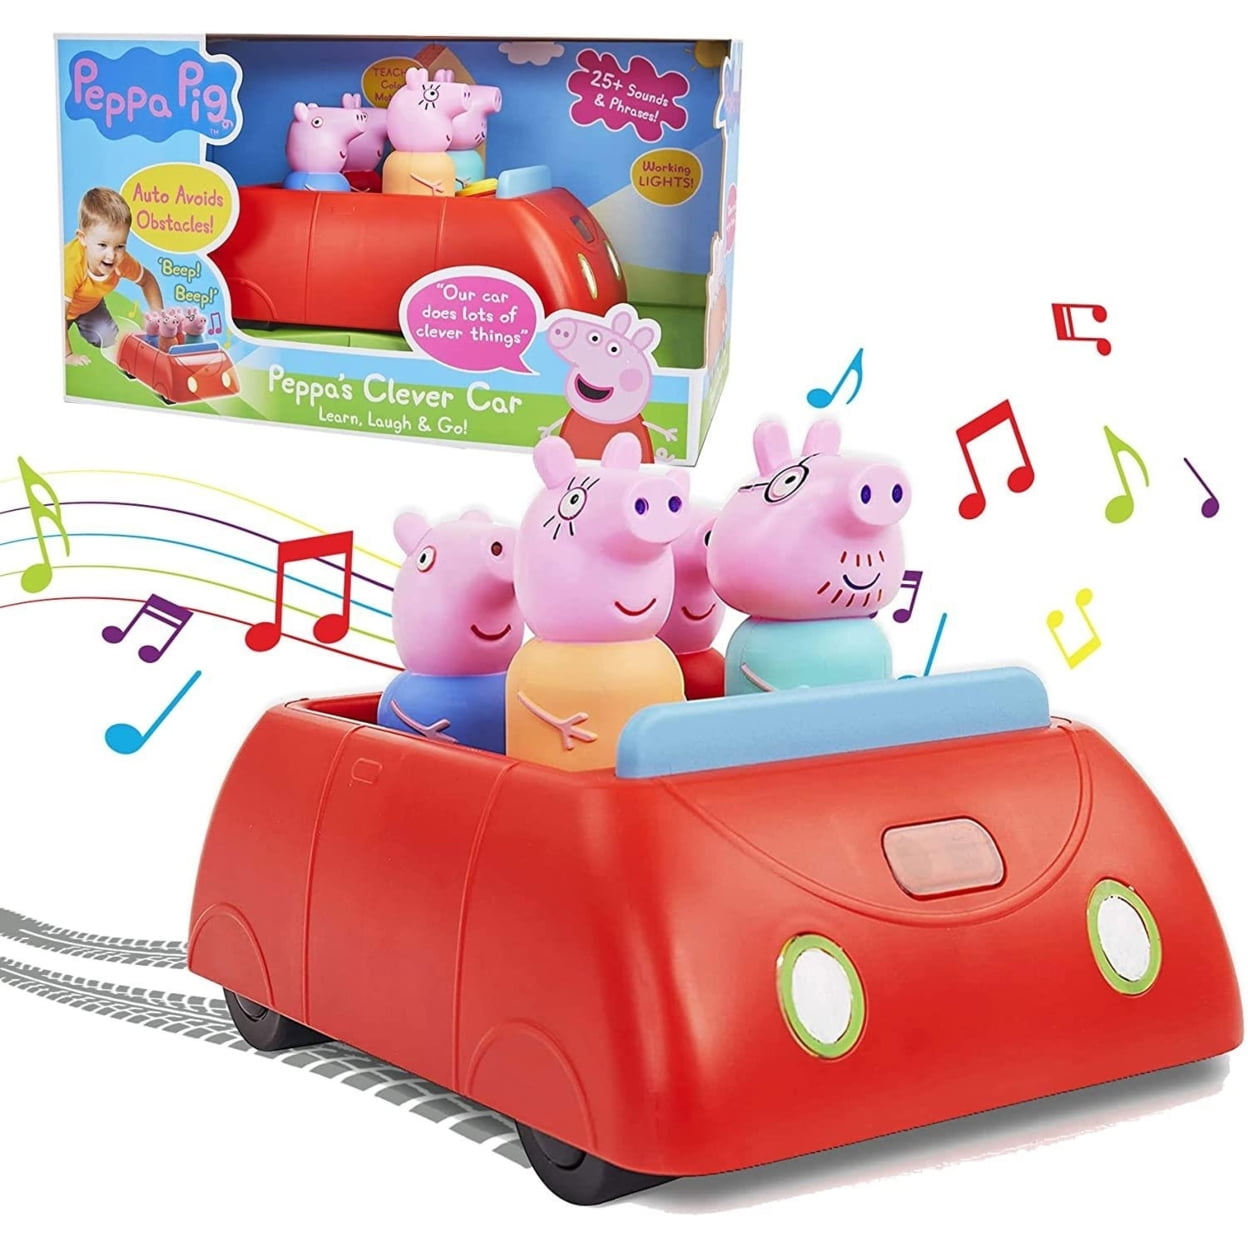 Peppa Pig's Family Red Clever Car Lights Sounds George Daddy Mummy Pig WOW! Stuff -